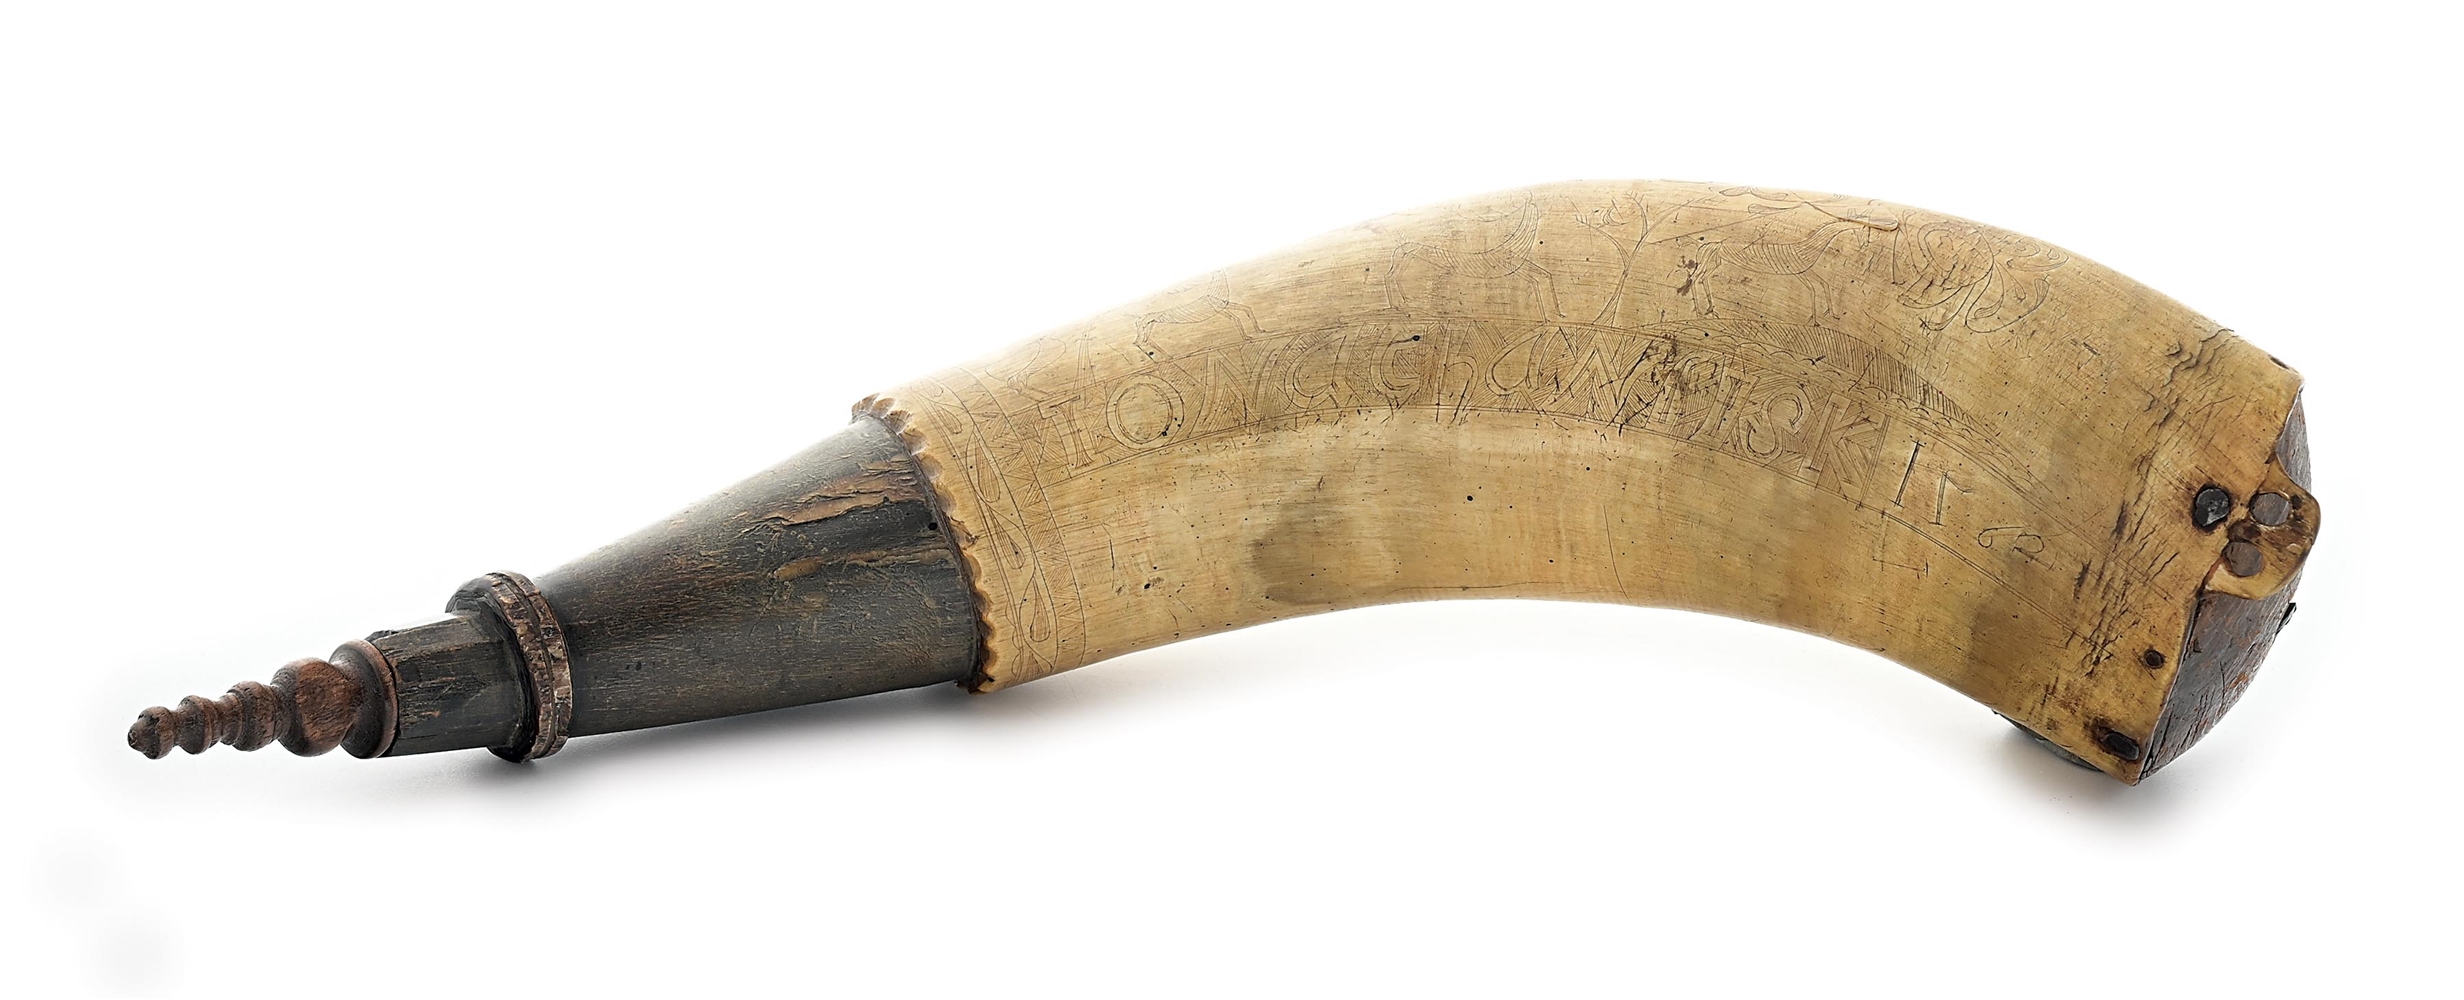 ENGRAVED 1762 DATED POWDER HORN OF JONATHAN FISK.